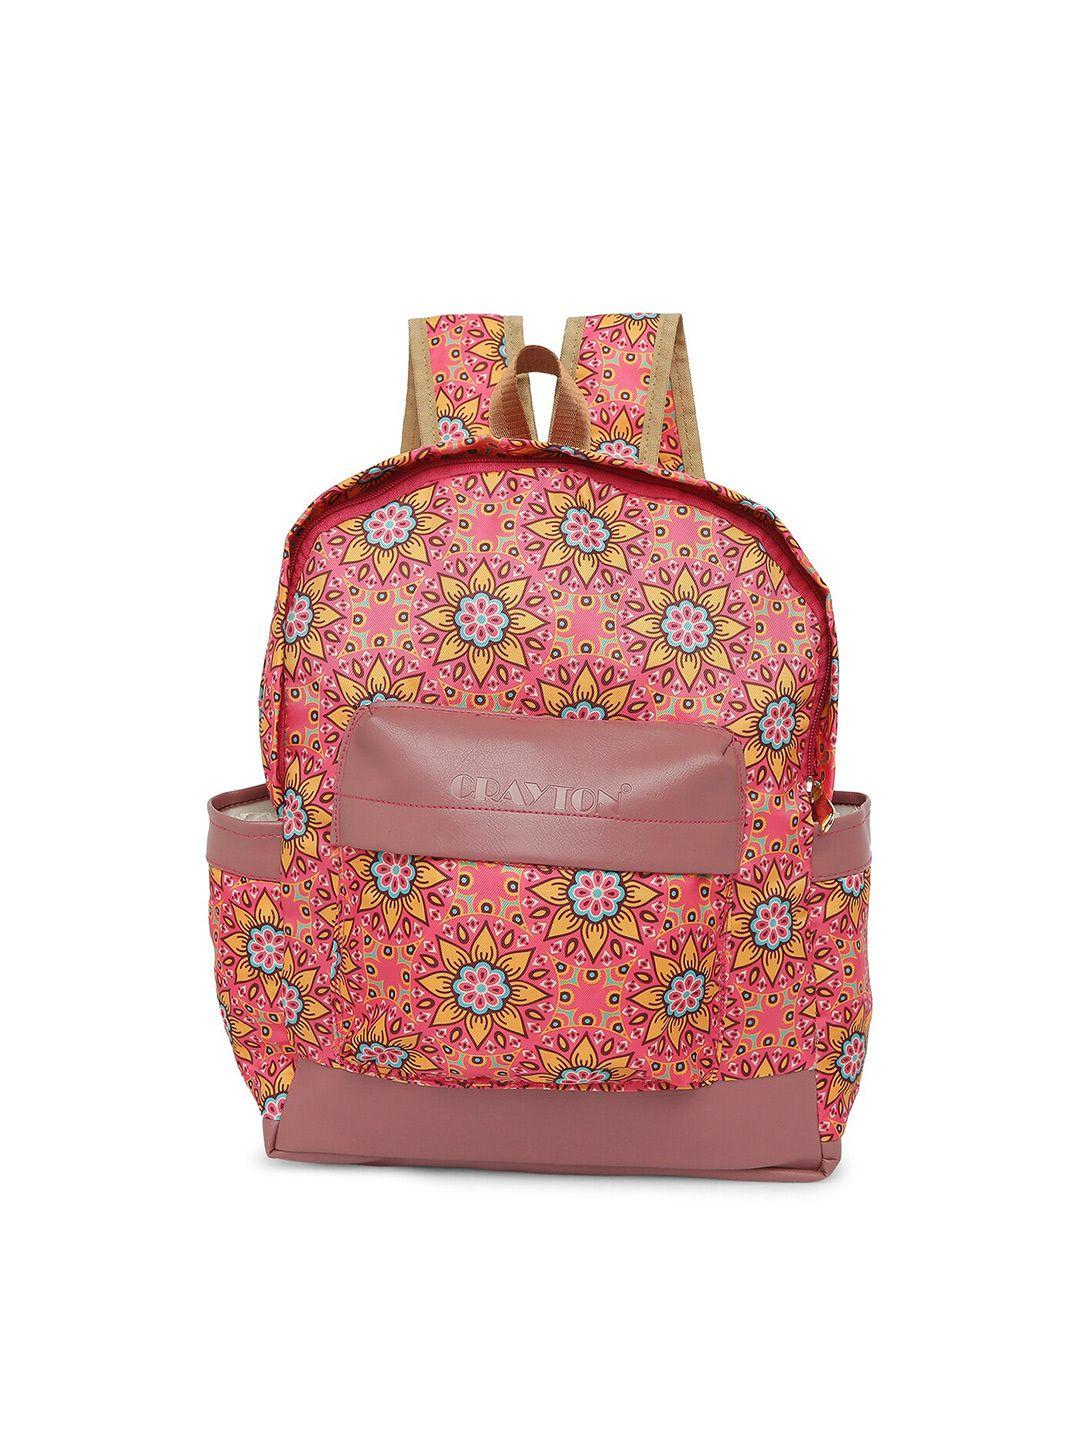 crayton women pink & yellow graphic backpack with compression straps